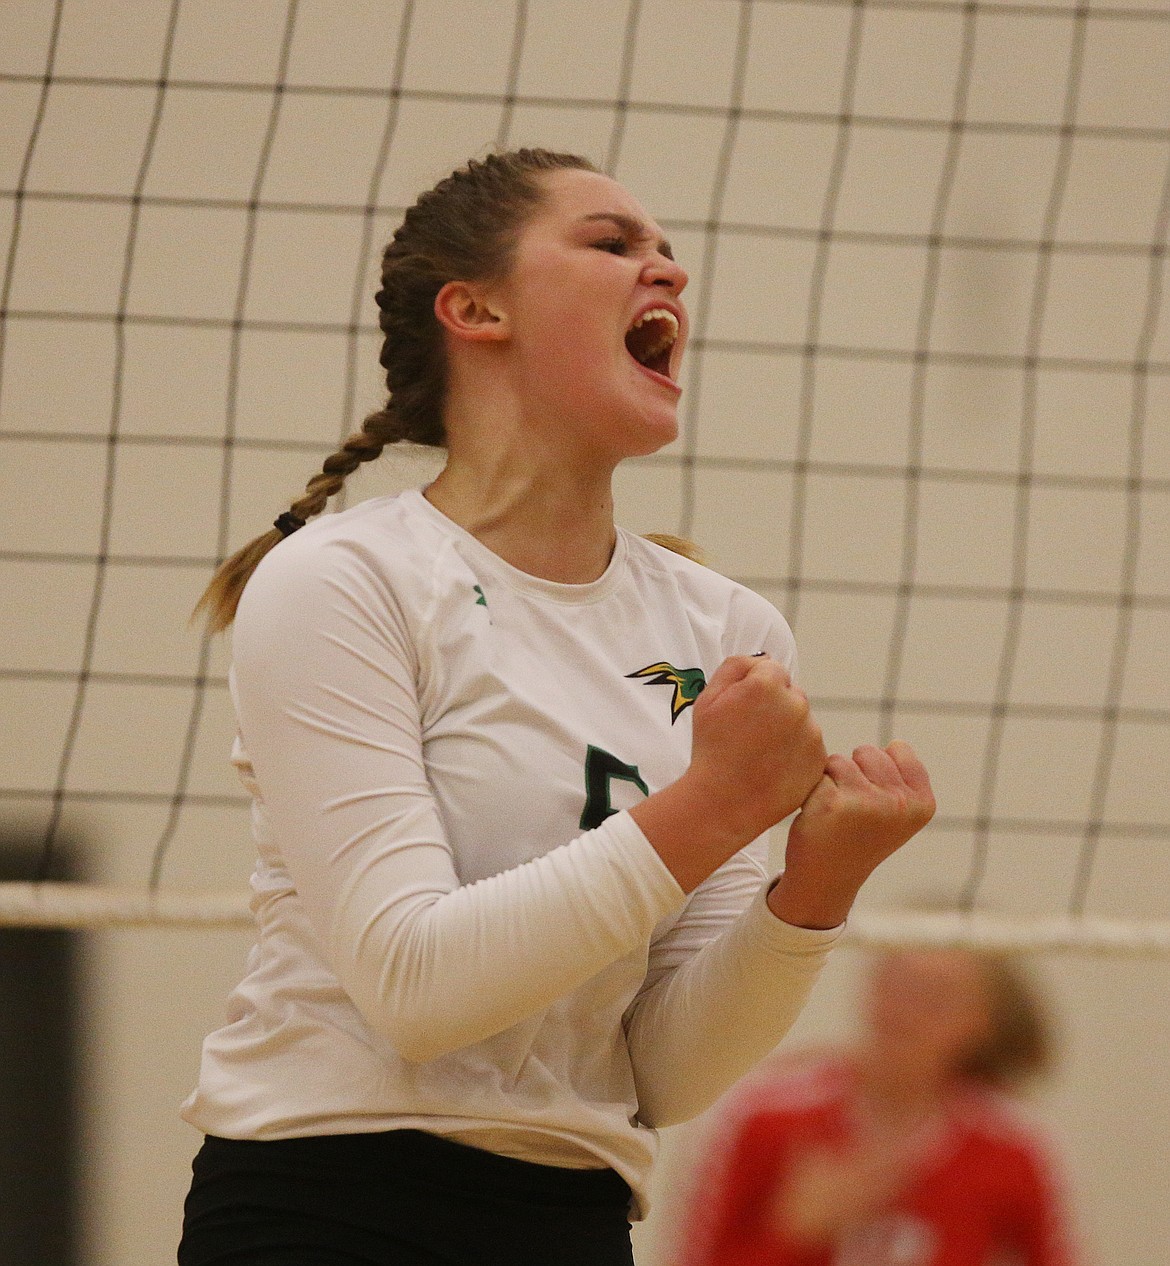 Lakeland&#146;s Daphne Carroll celebrates a point against Sandpoint in Thursday night&#146;s match at Lakeland High School.